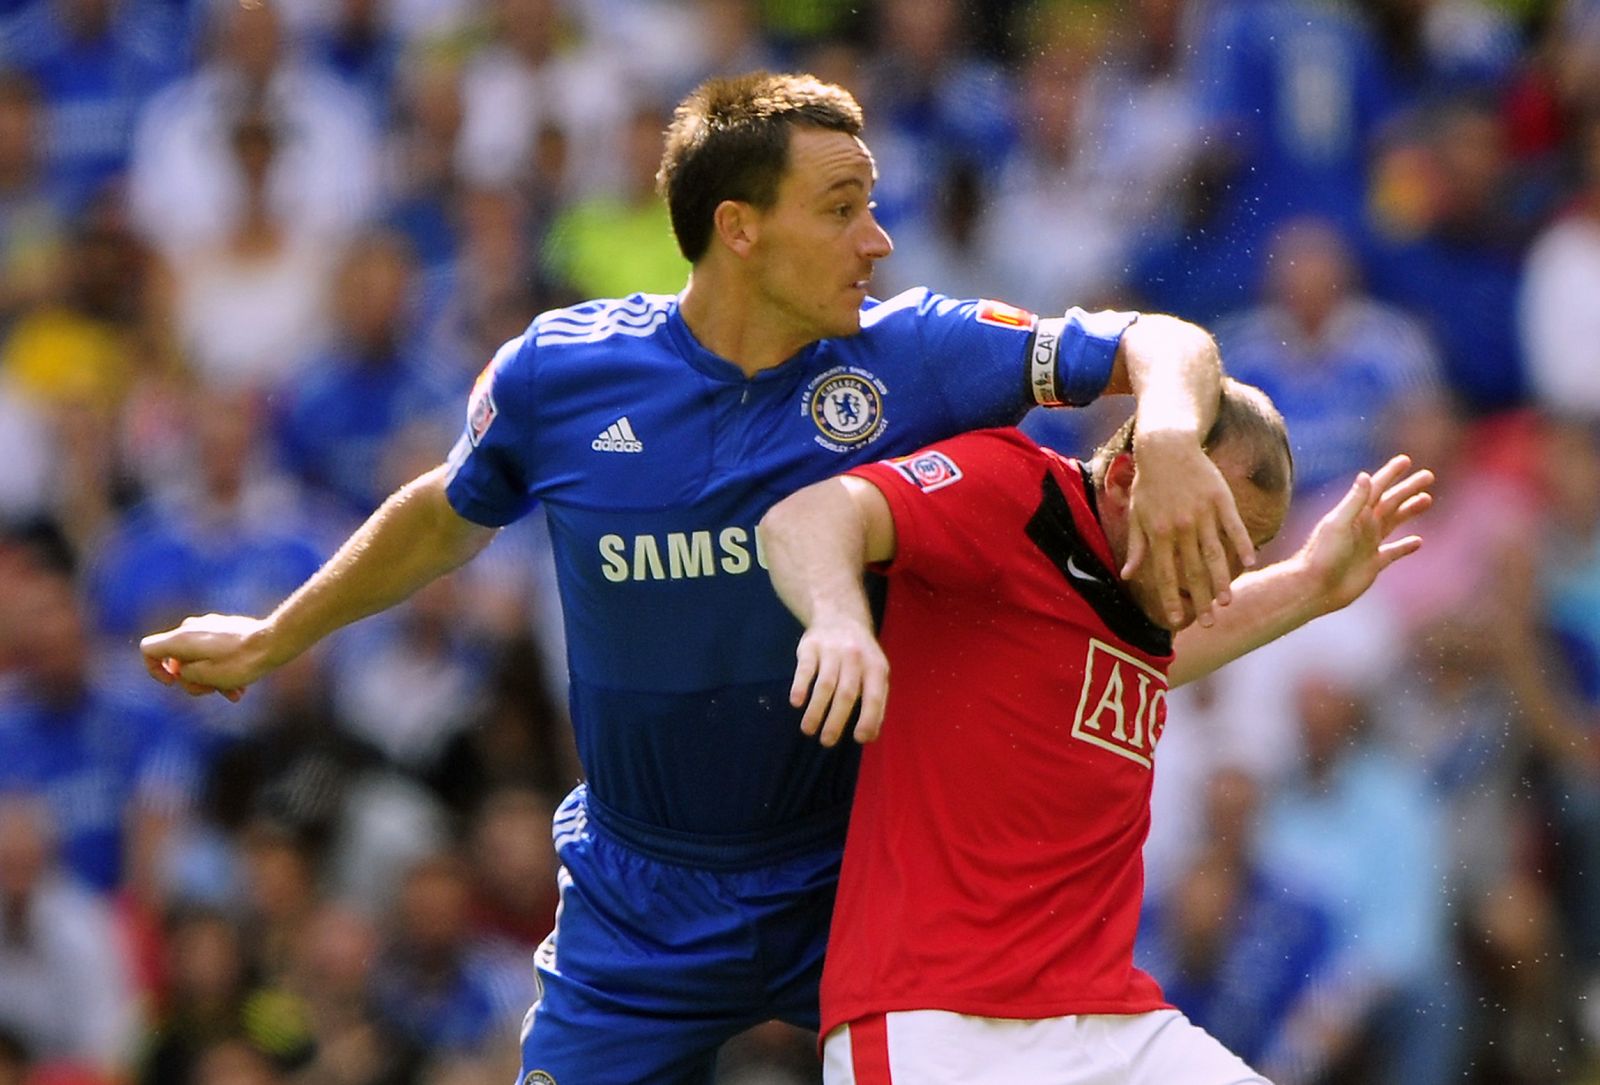 Chelsea's Terry challenges Manchester United's Rooney during their English Community Shield soccer match in London